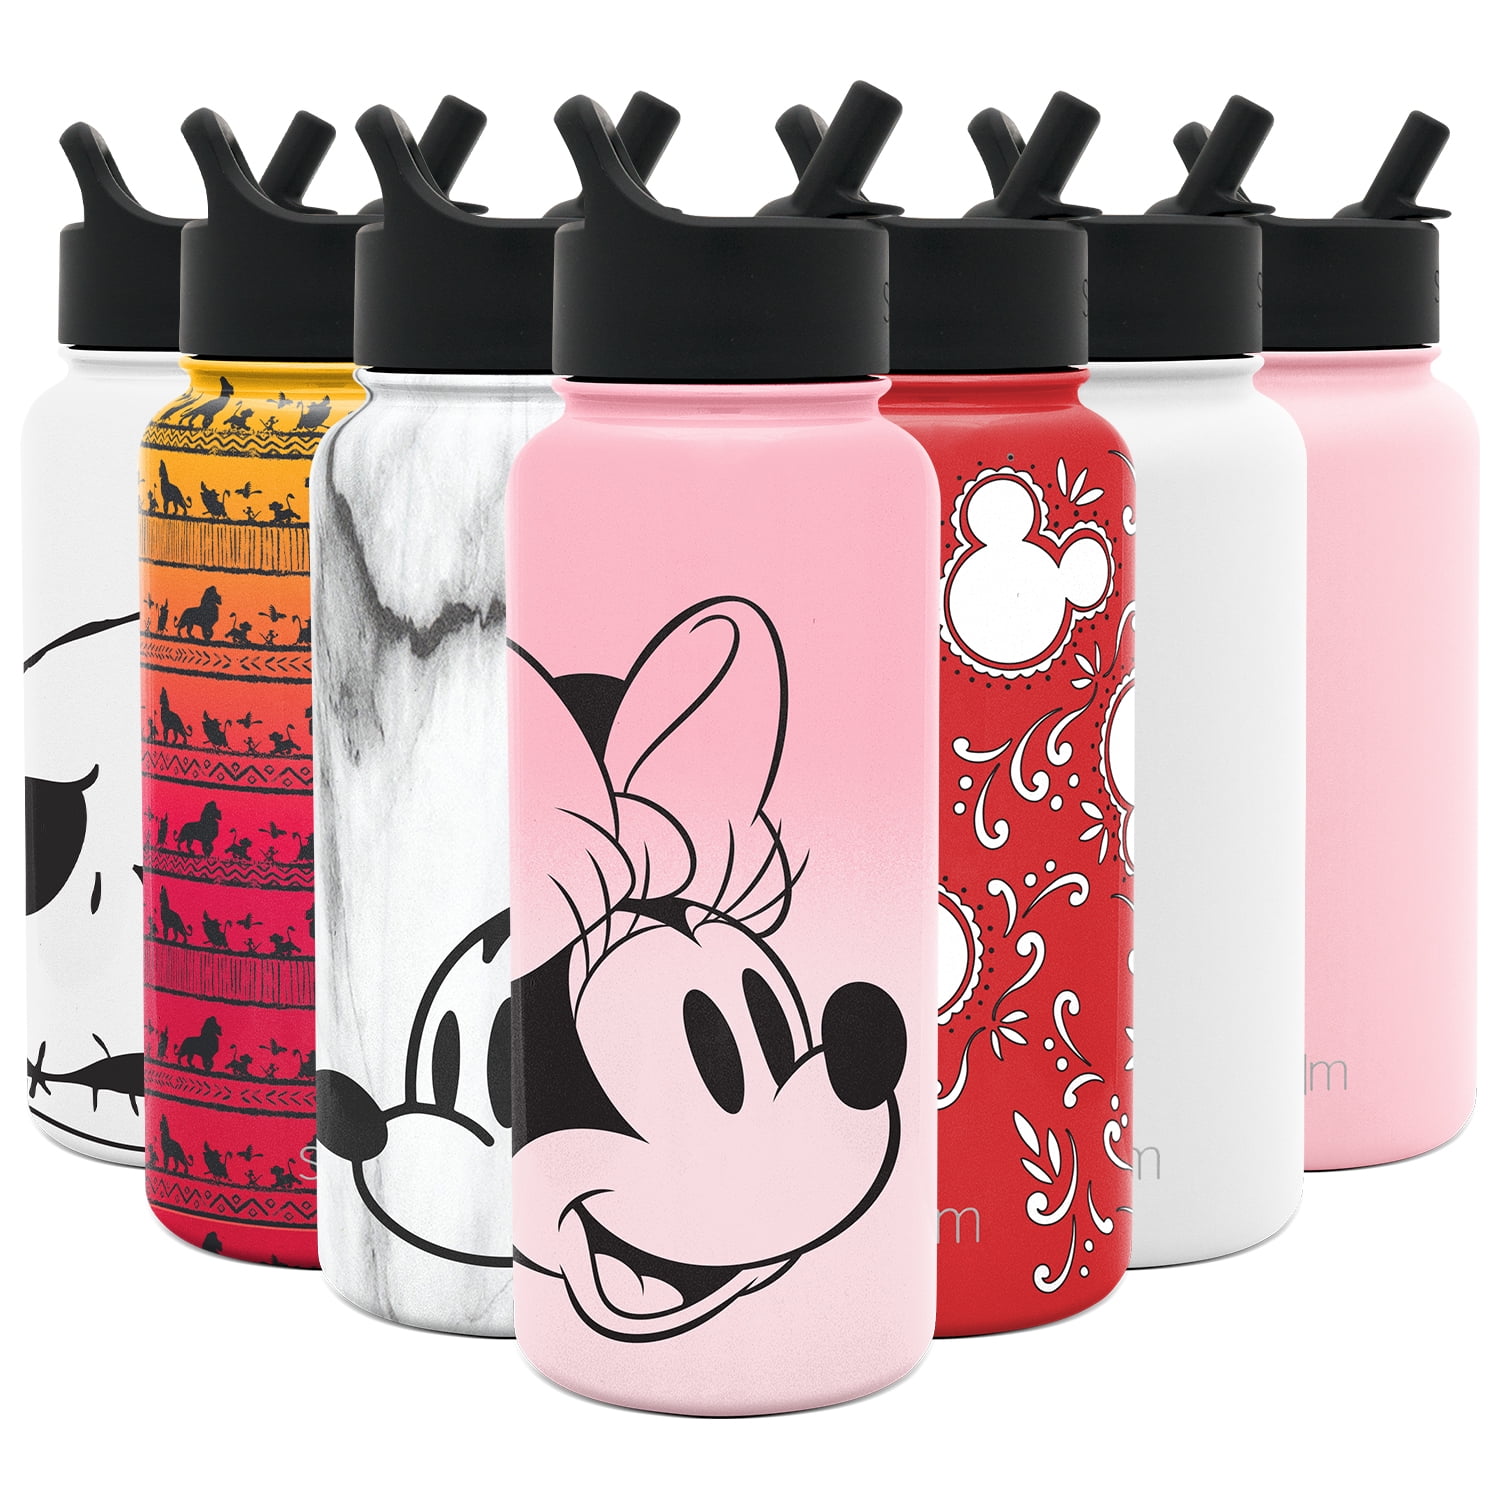 8 Disney Water Bottles That Are Perfect for the Parks!